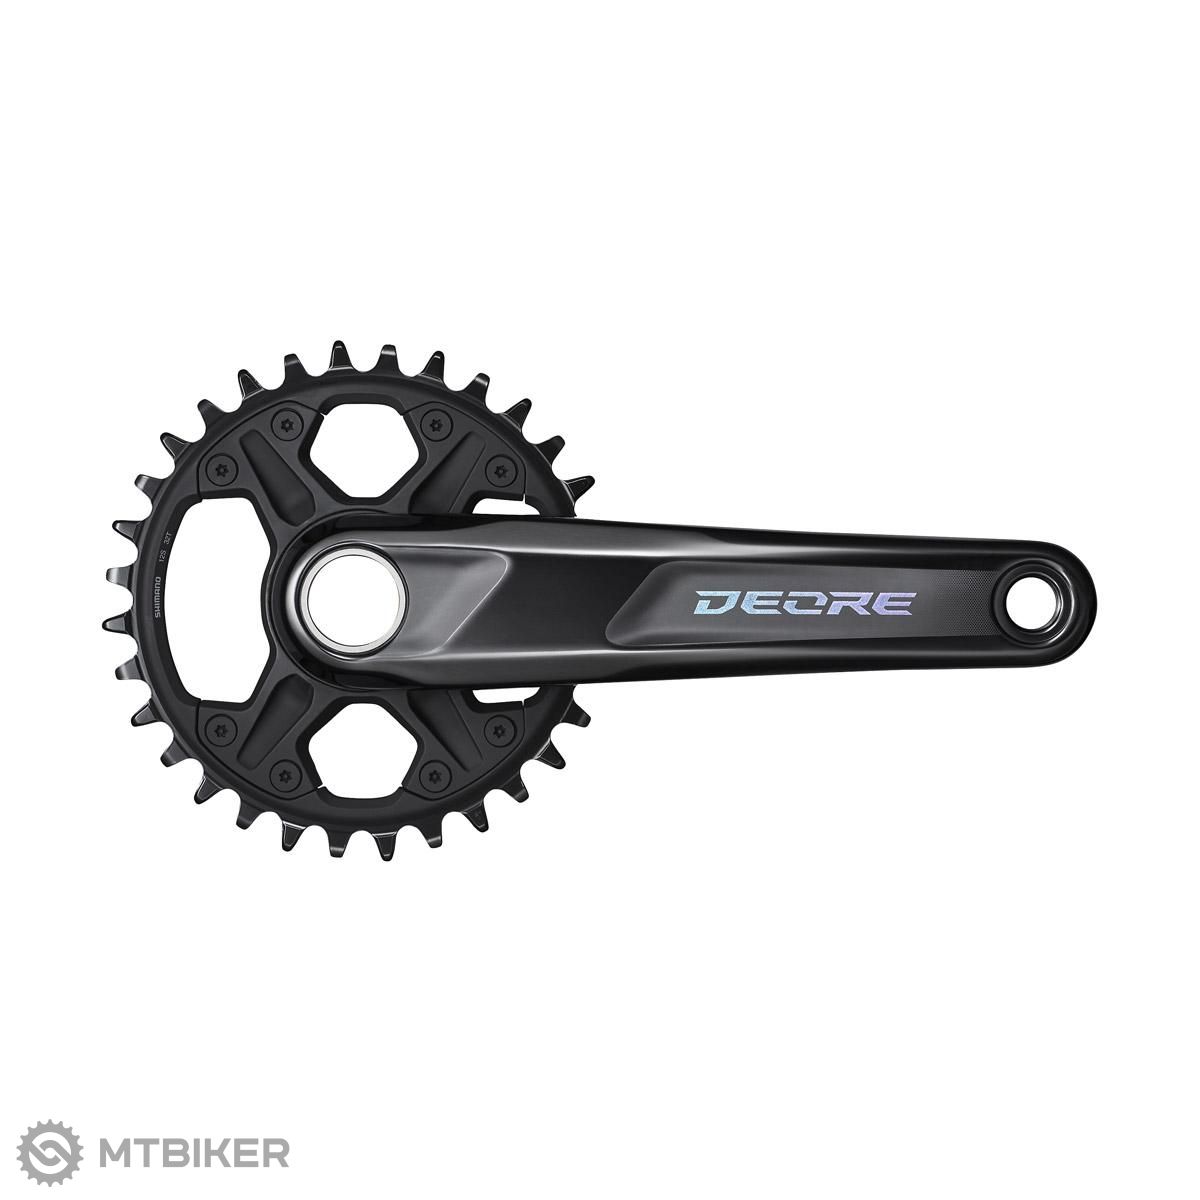 Shimano Deore M6100 cranks, HTII, 1x12, 32T, 170 mm, without bearing